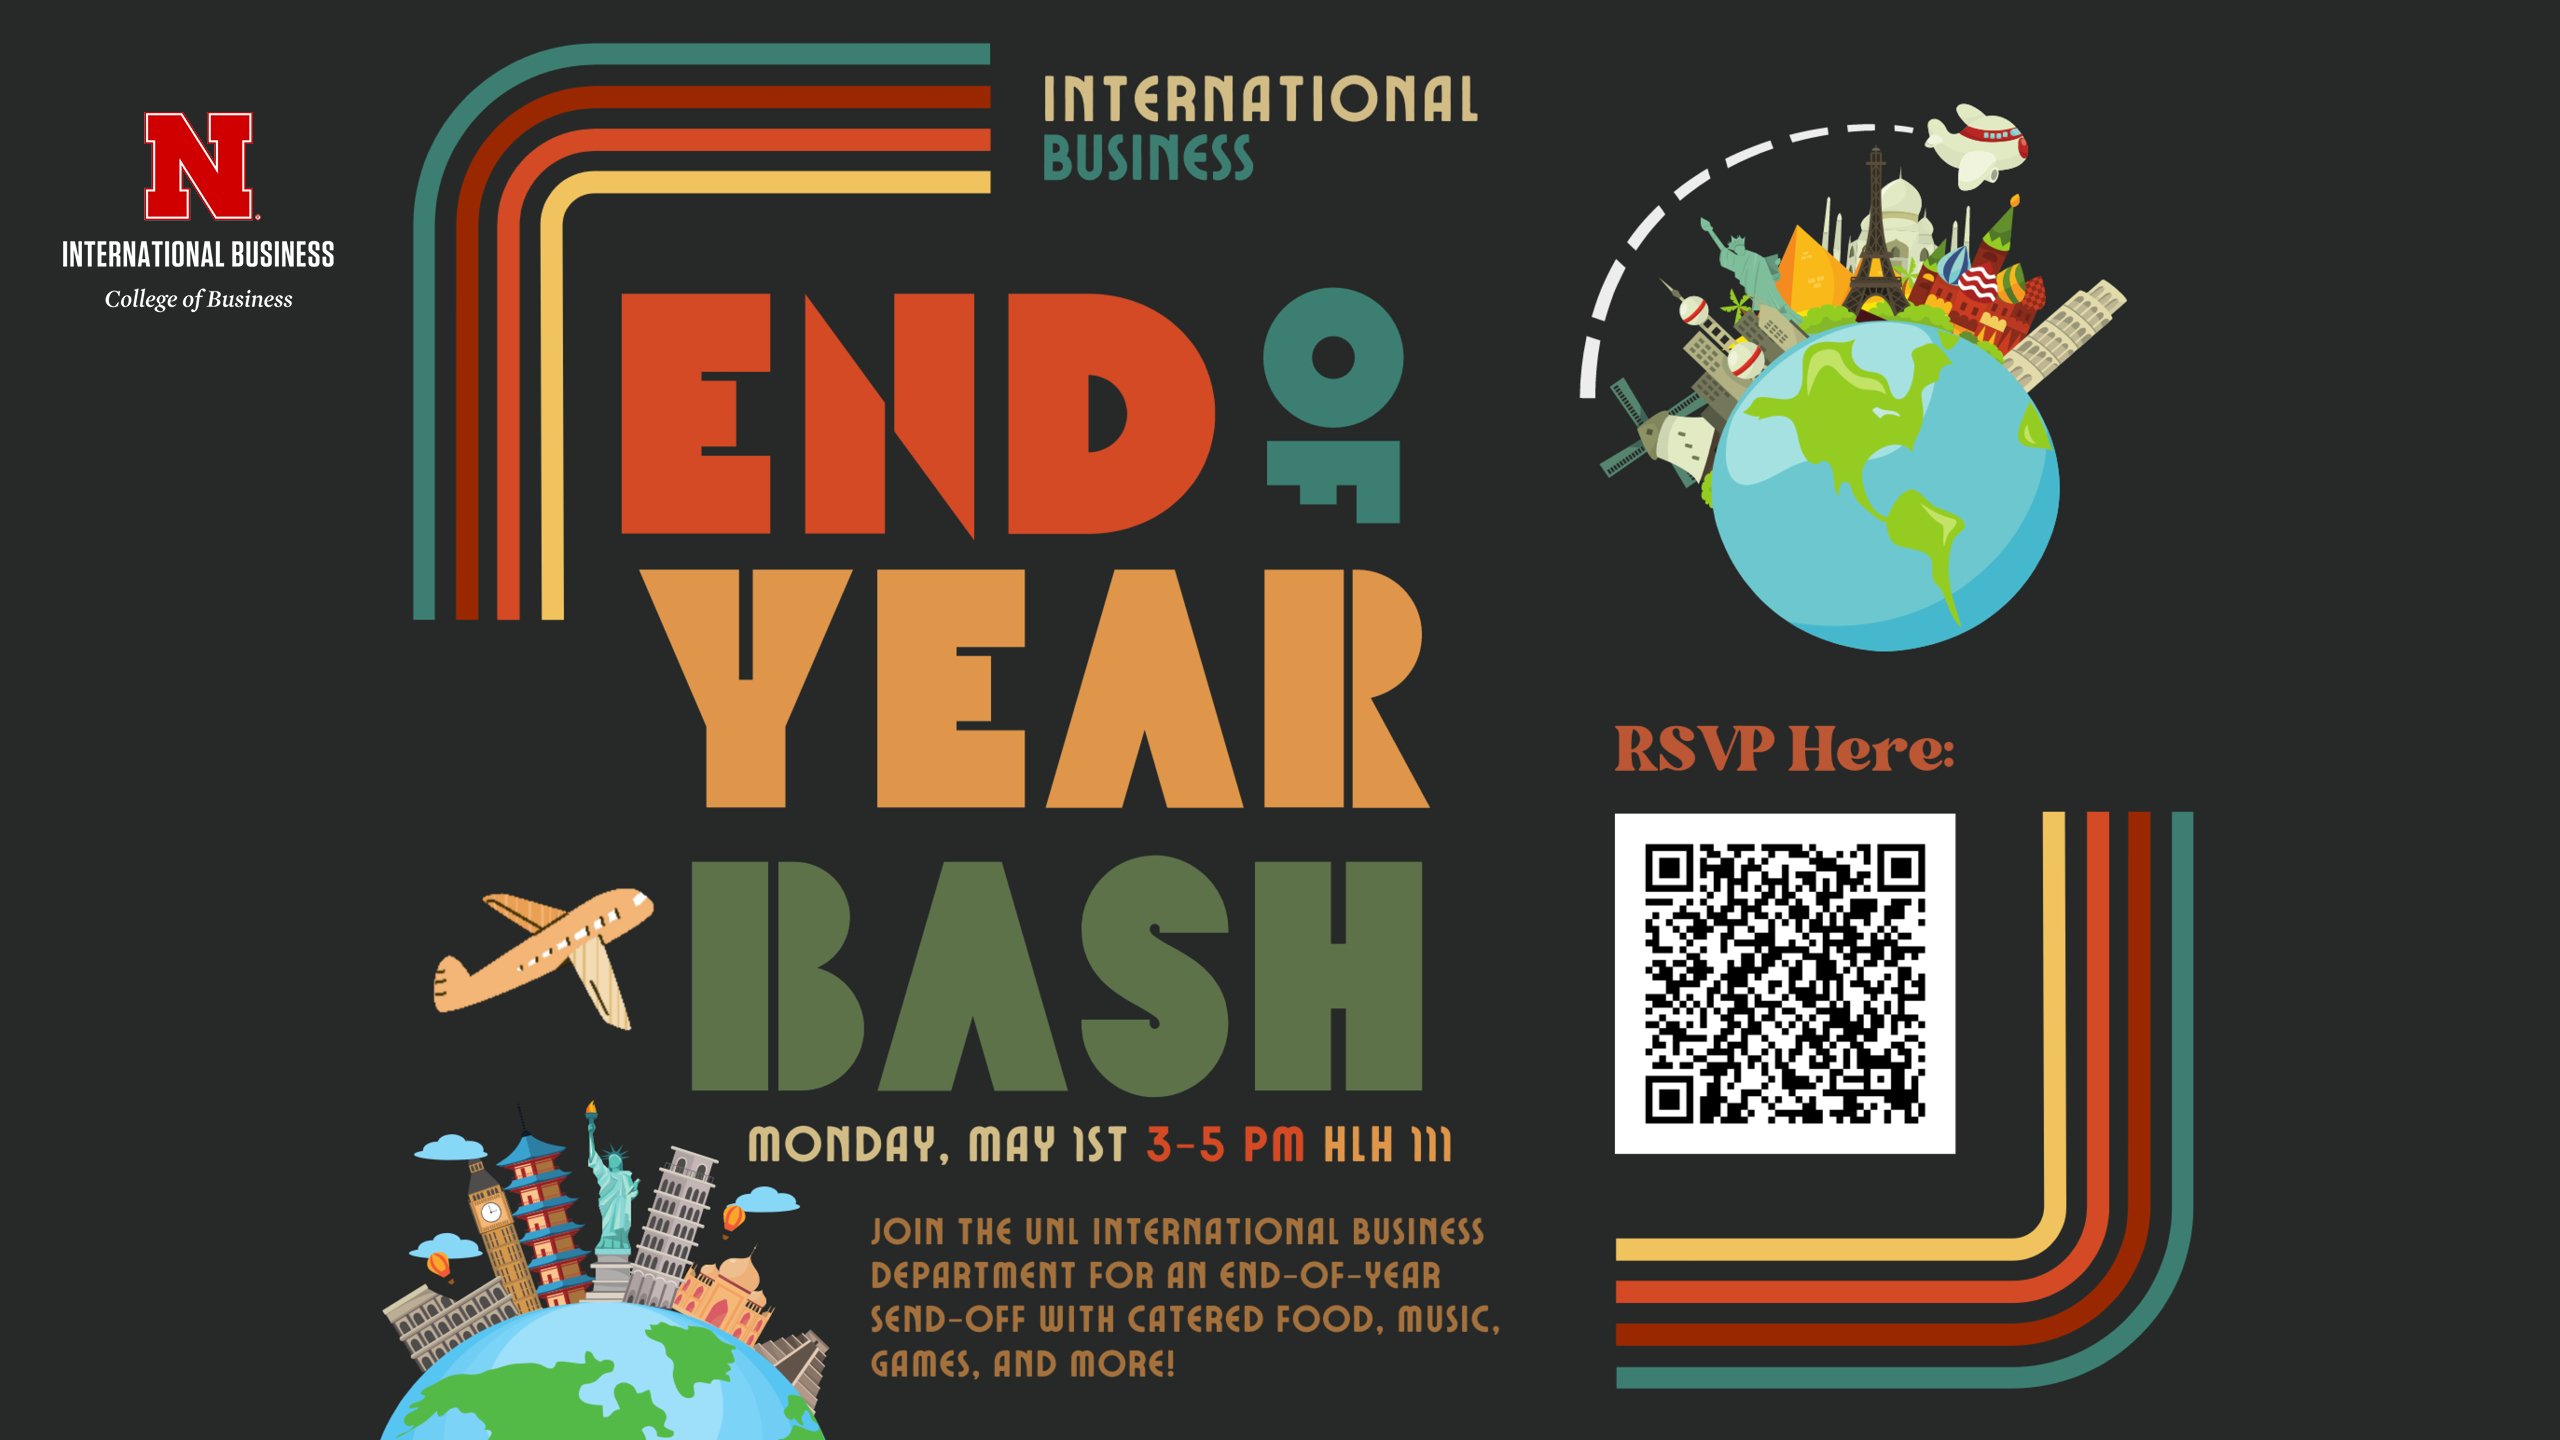 International Business End of the Year Bash | May 1 | HLH 111 from 3-5 p.m. 